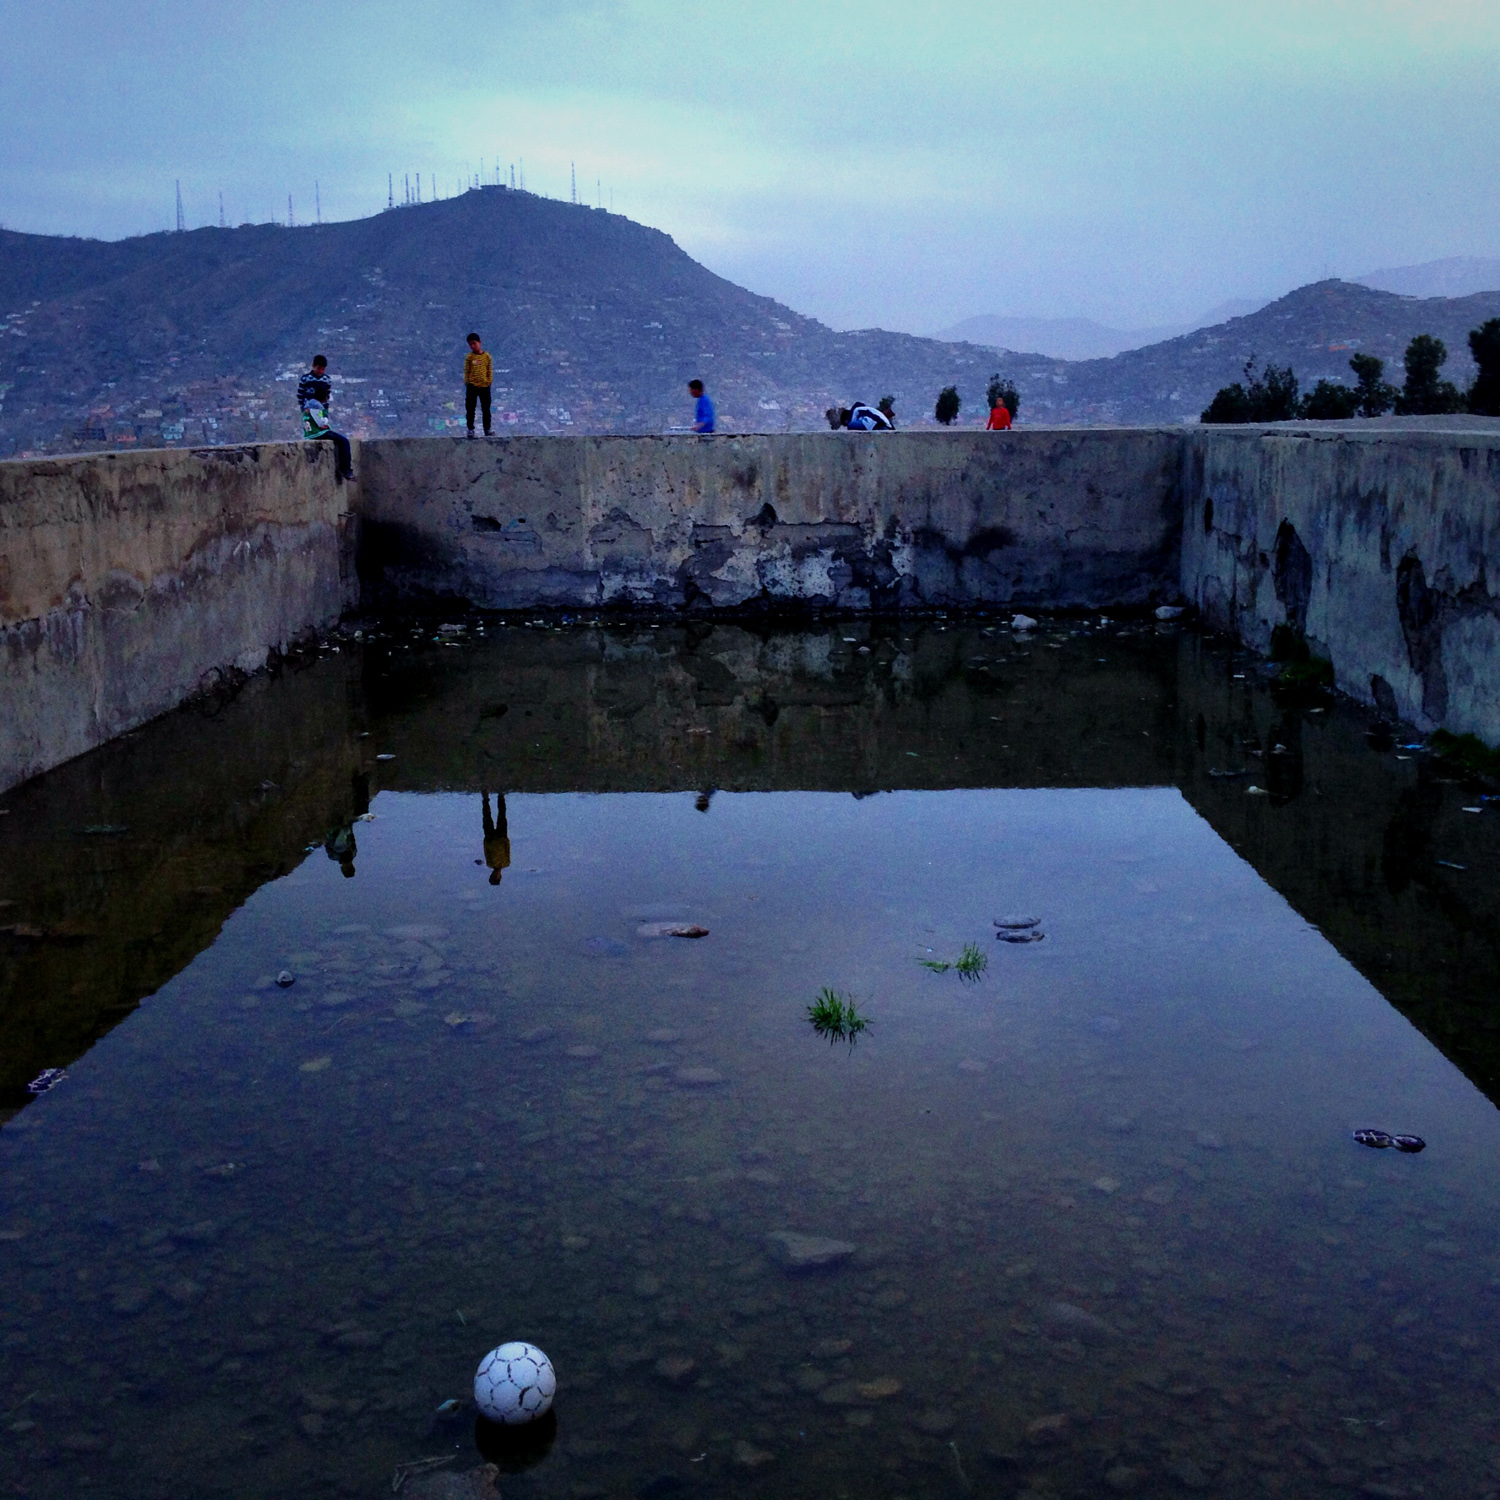 Shamzi Plaza, Kabul, AfghanistanSoccer field turned swimming pool.Andrew Quilty / Oculi 9.4.2014.